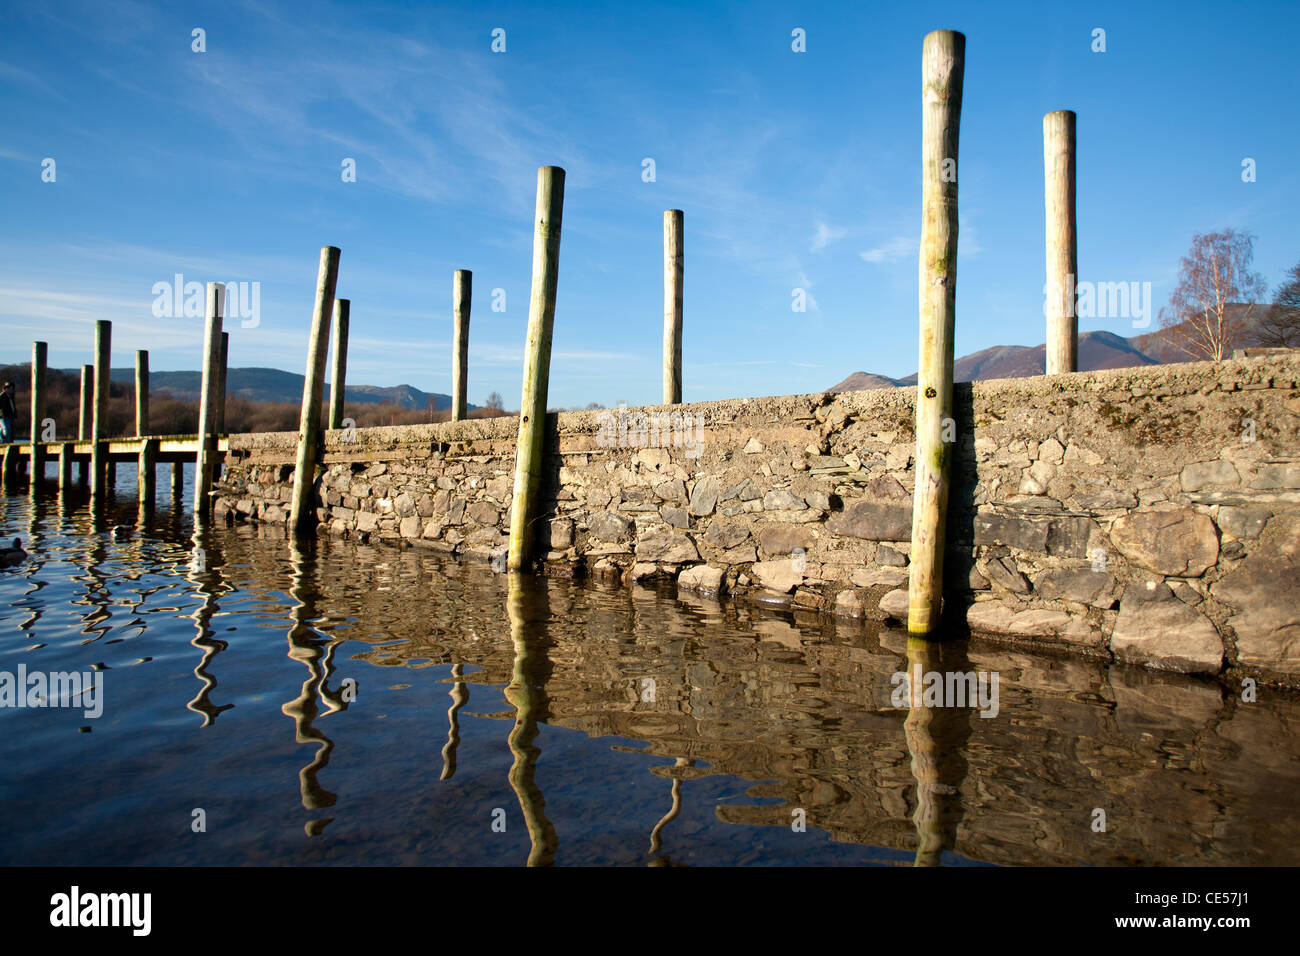 Ferry landing stage on Derwentwater near Keswick in the Lake District. Blue skies and clear water Stock Photo